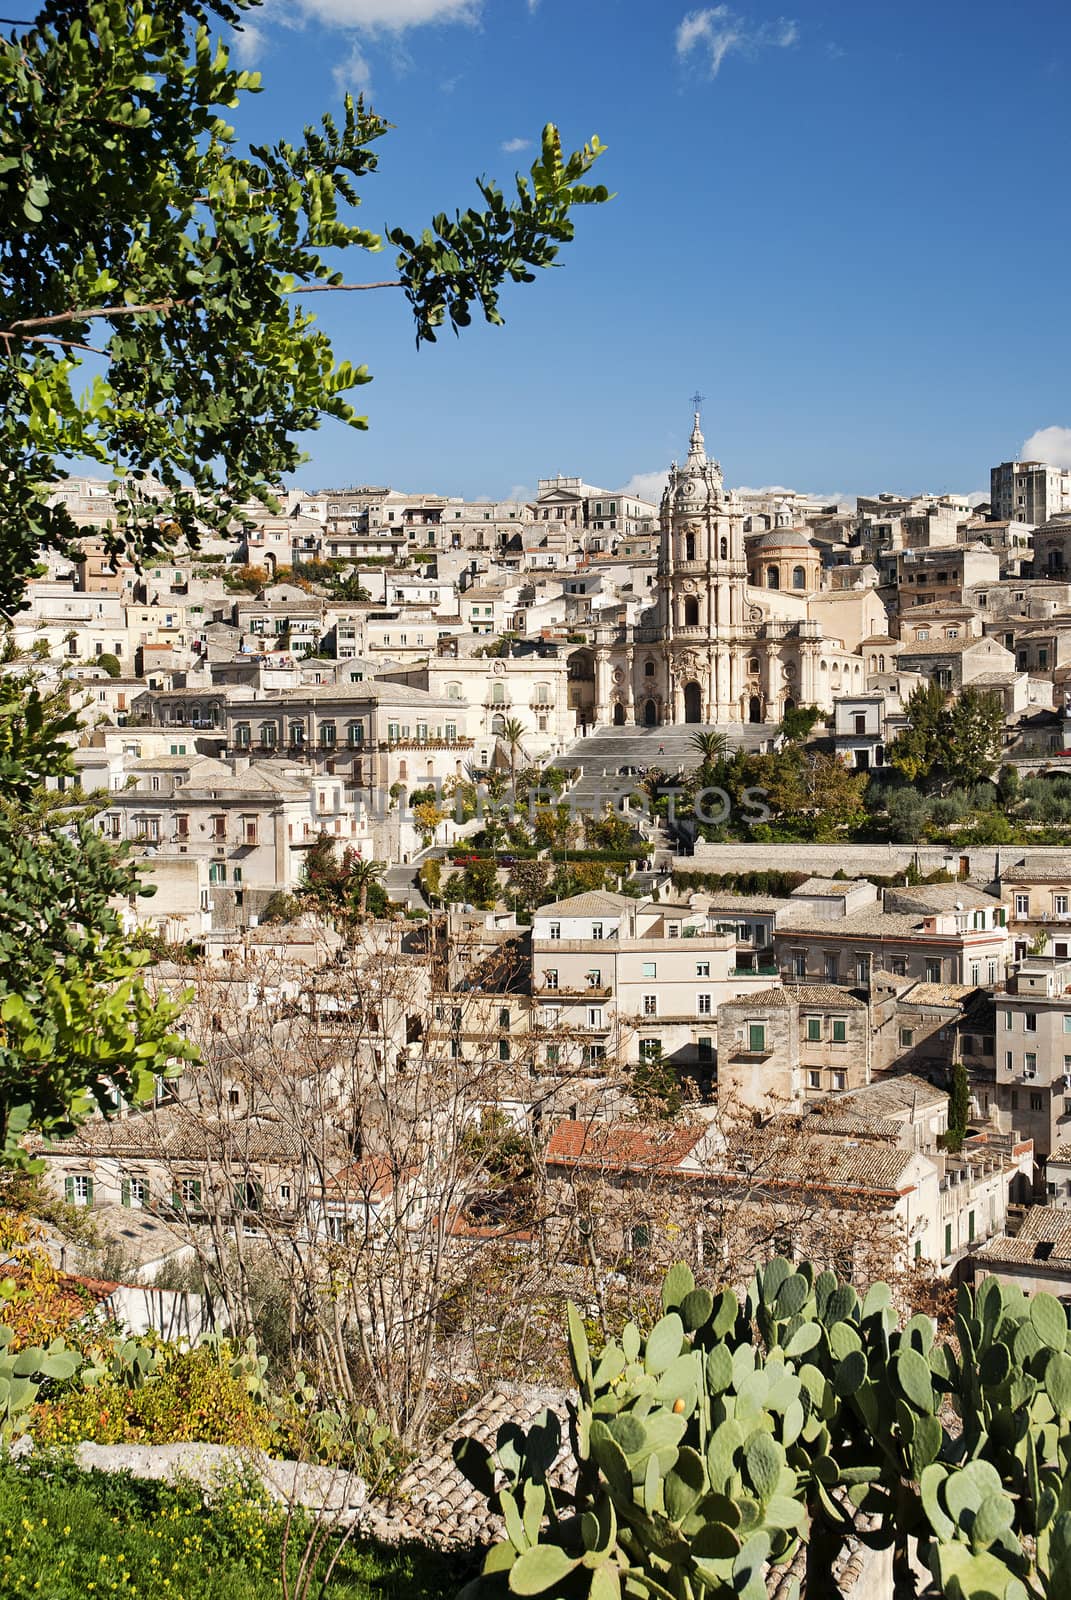 modica in sicily italy by jackmalipan